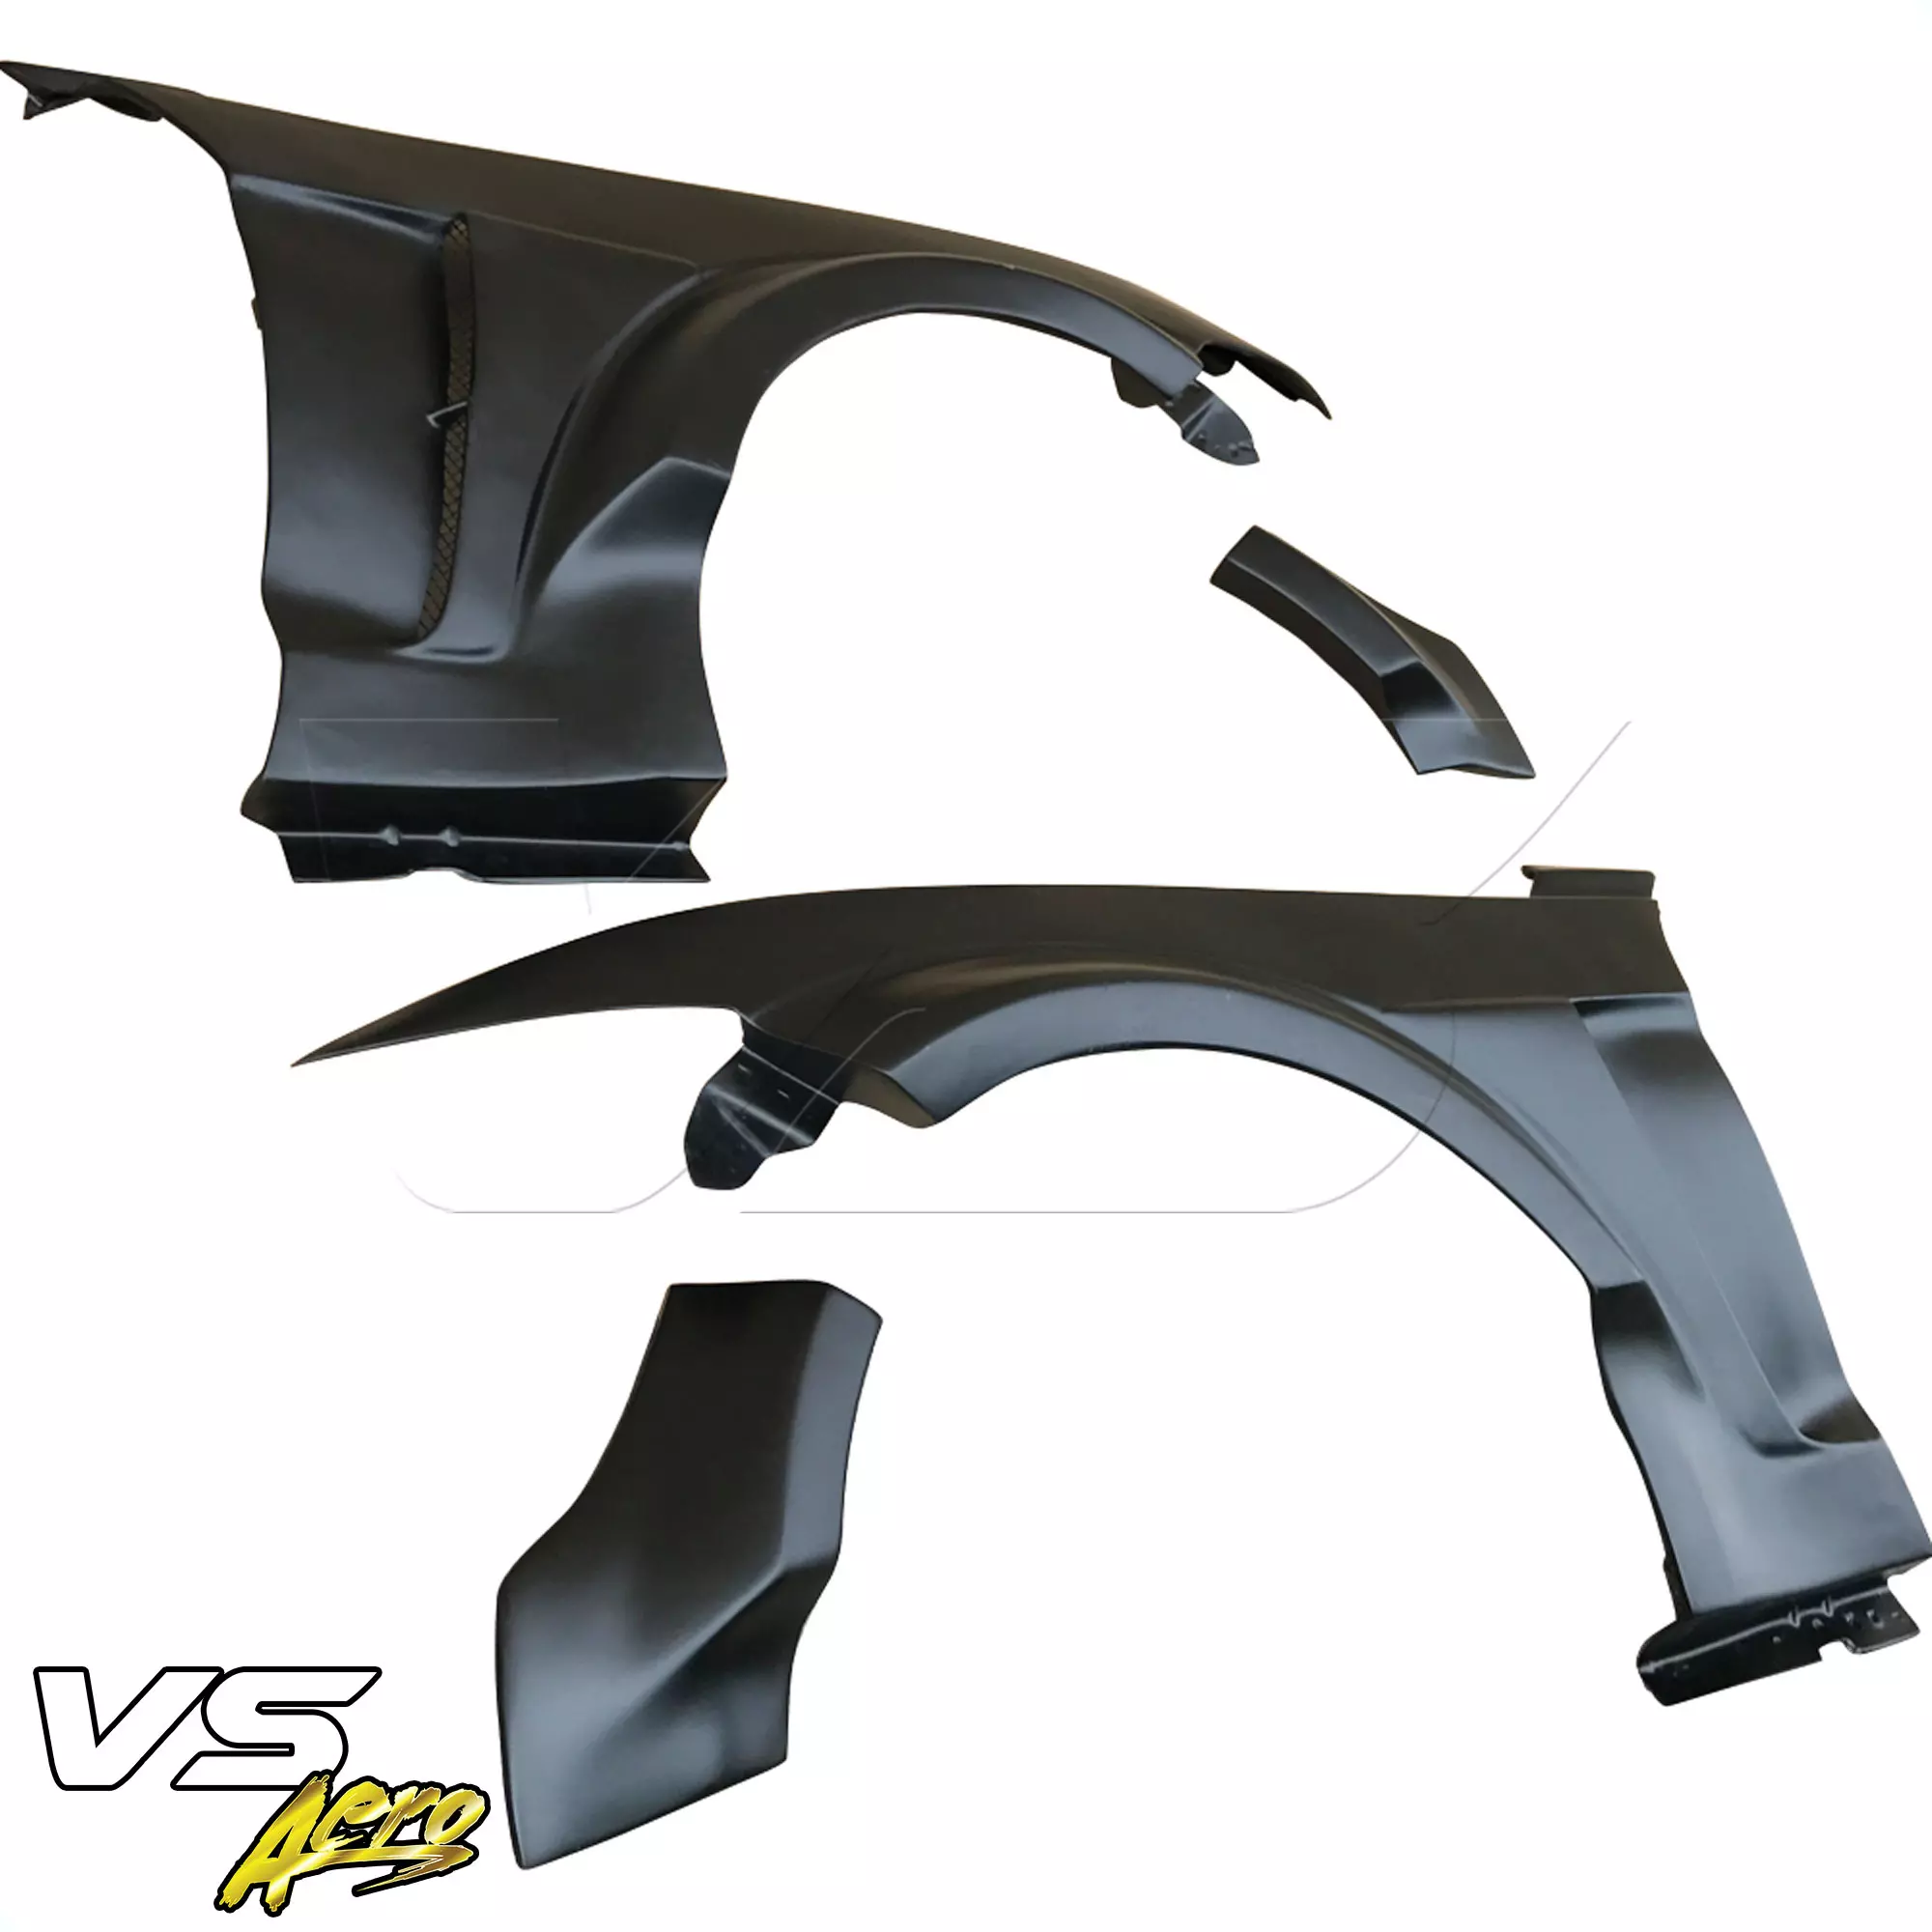 VSaero FRP KTOT Wide Body Fenders (front) > Ford Mustang 2015-2020 - Image 26